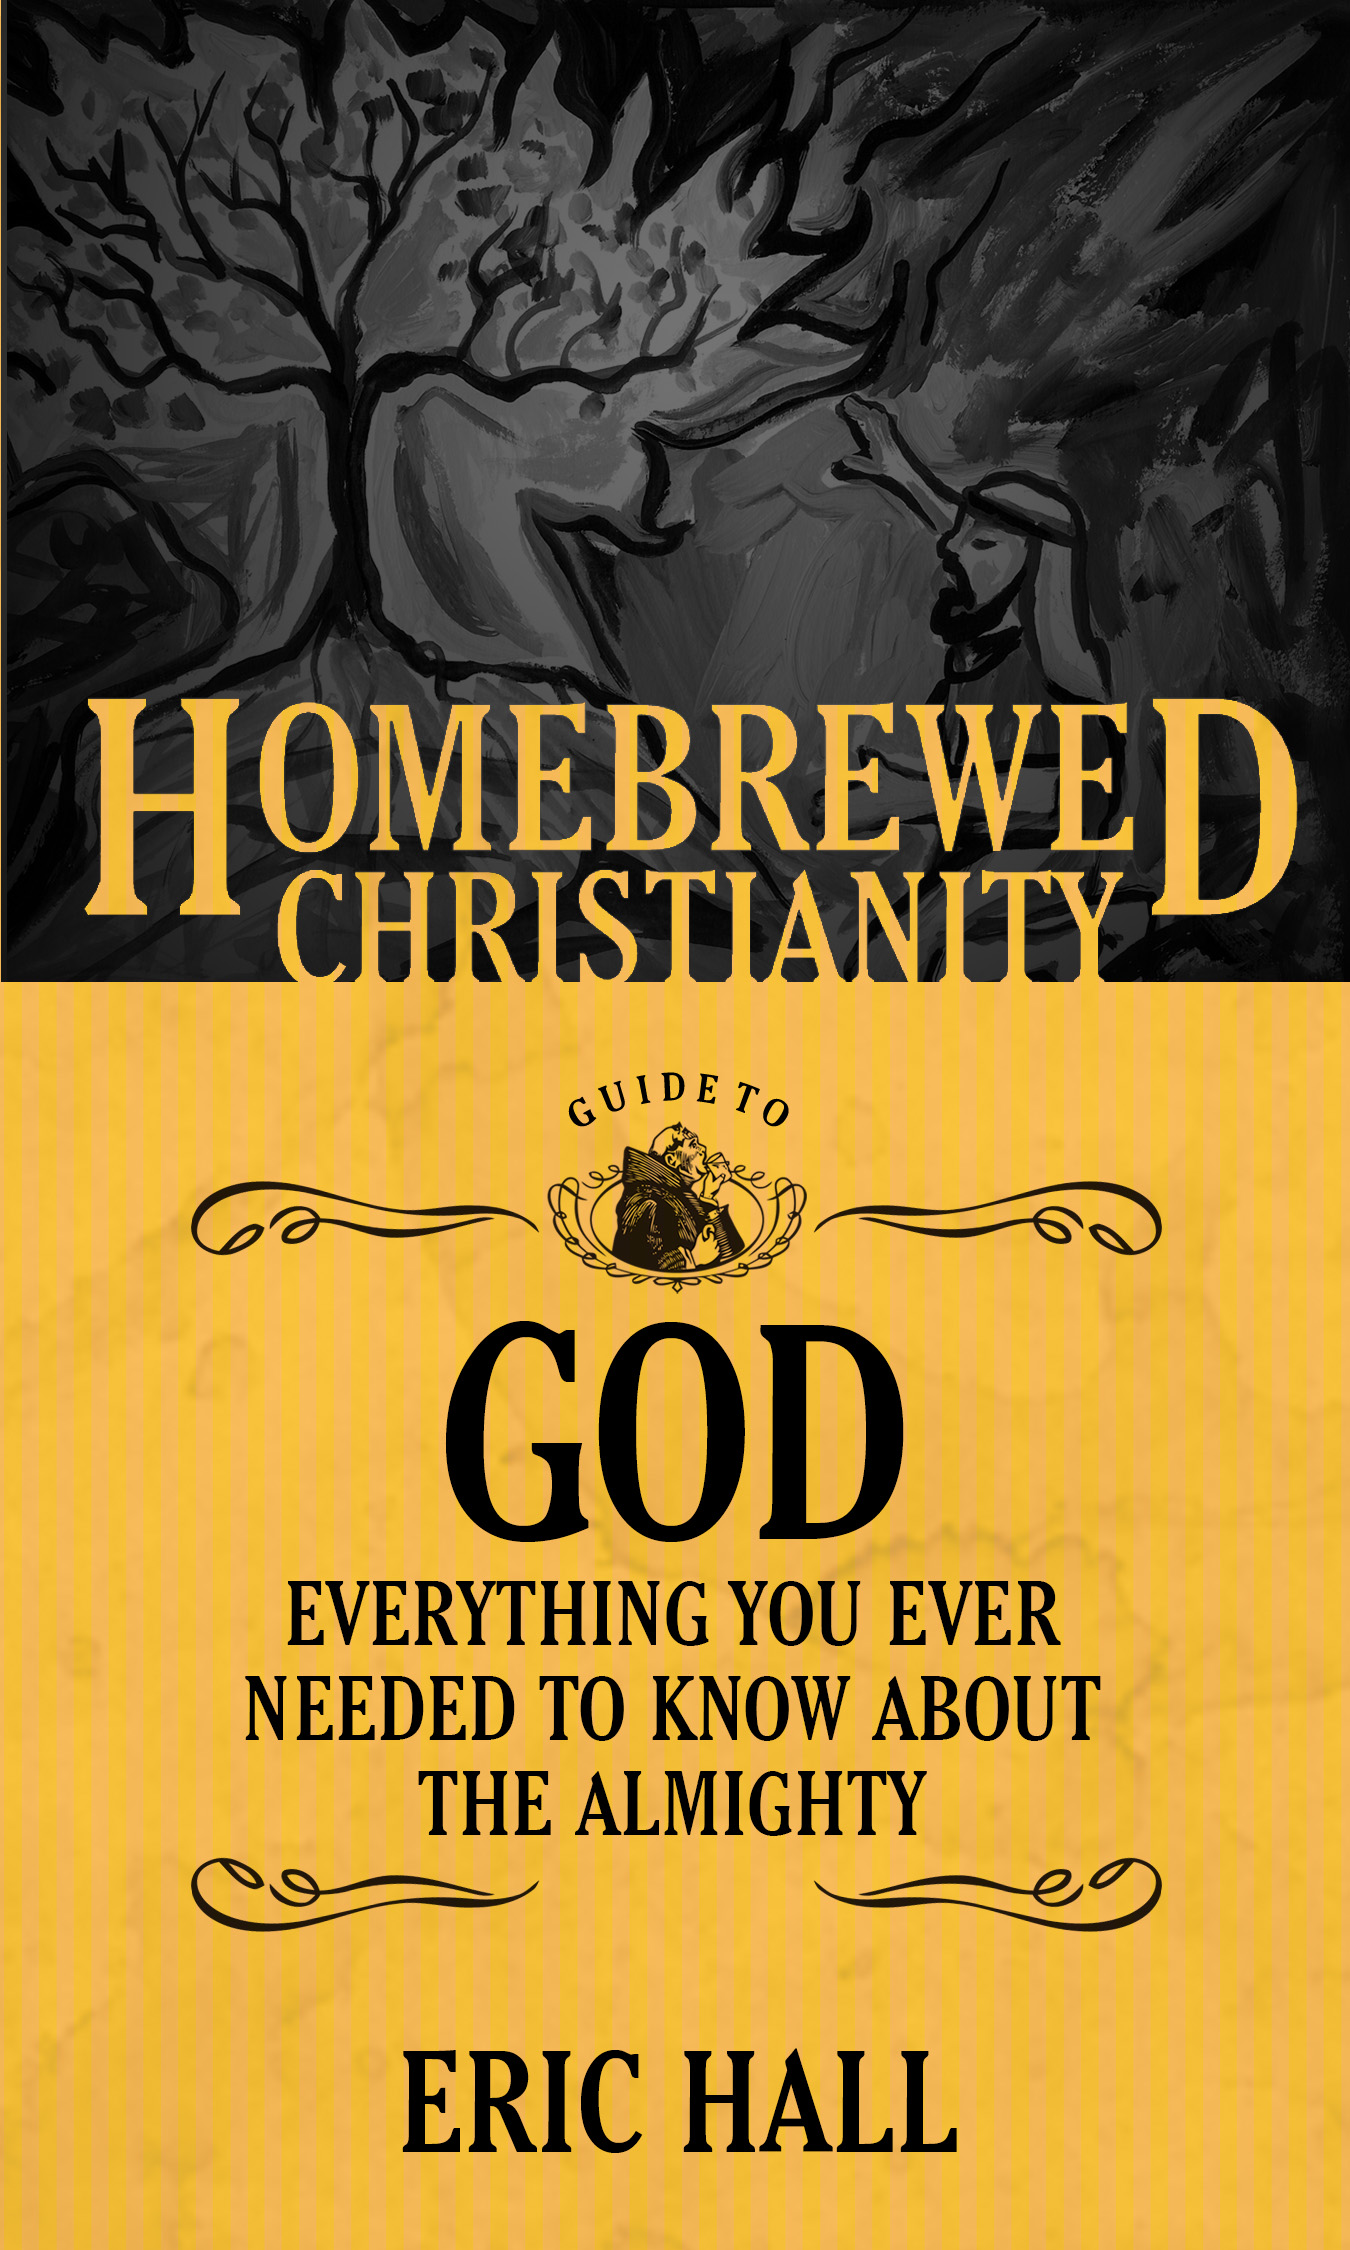 Episode 32: ”God: Everything You Ever Needed To Know About The Almighty” with Eric E. Hall